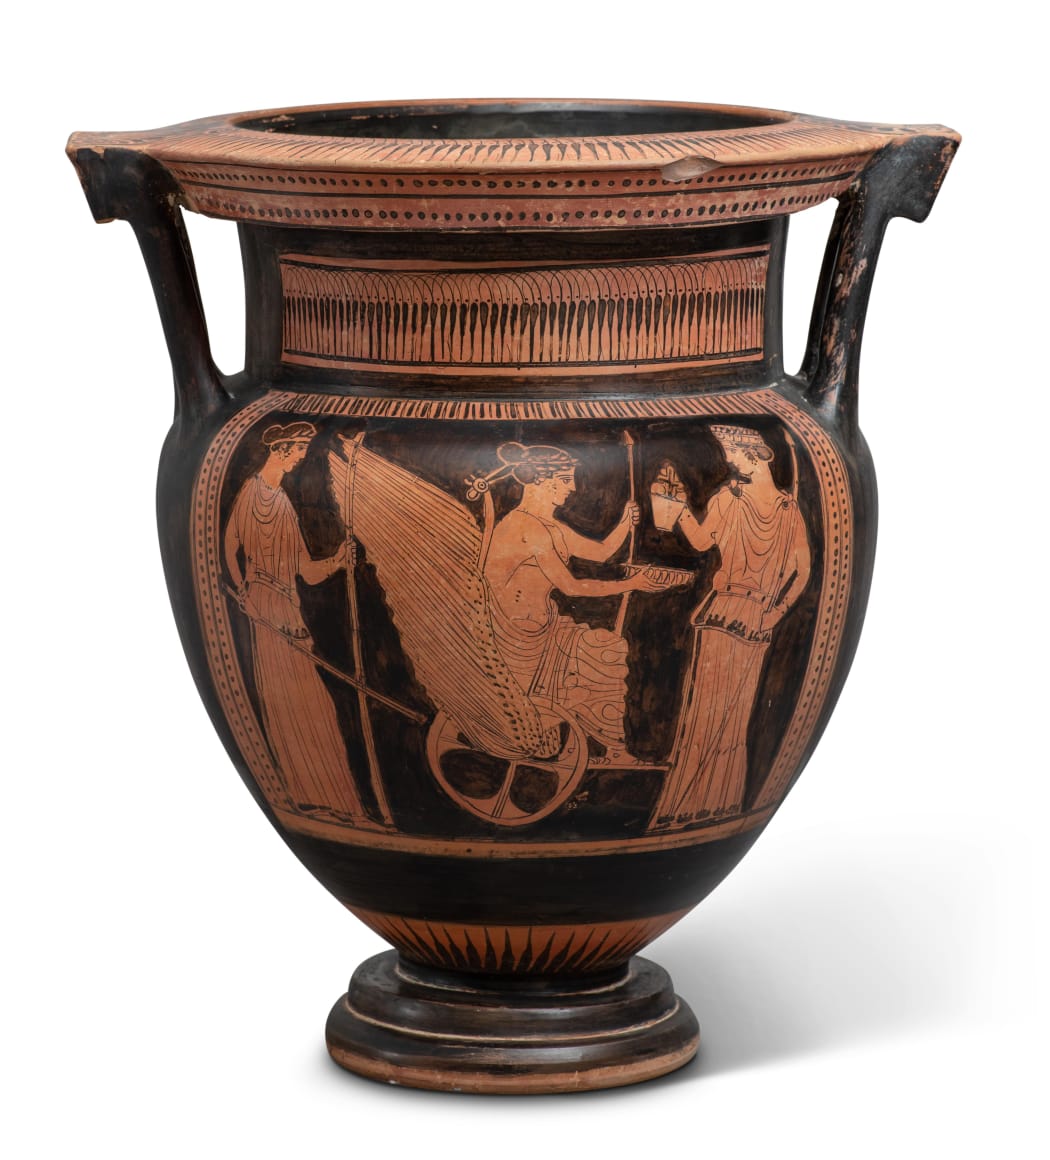 AN ATTIC RED-FIGURE KRATER, ATTRIBUTED TO THE DUOMO PAINTER. Classical Period, circa 440 - 430 BC